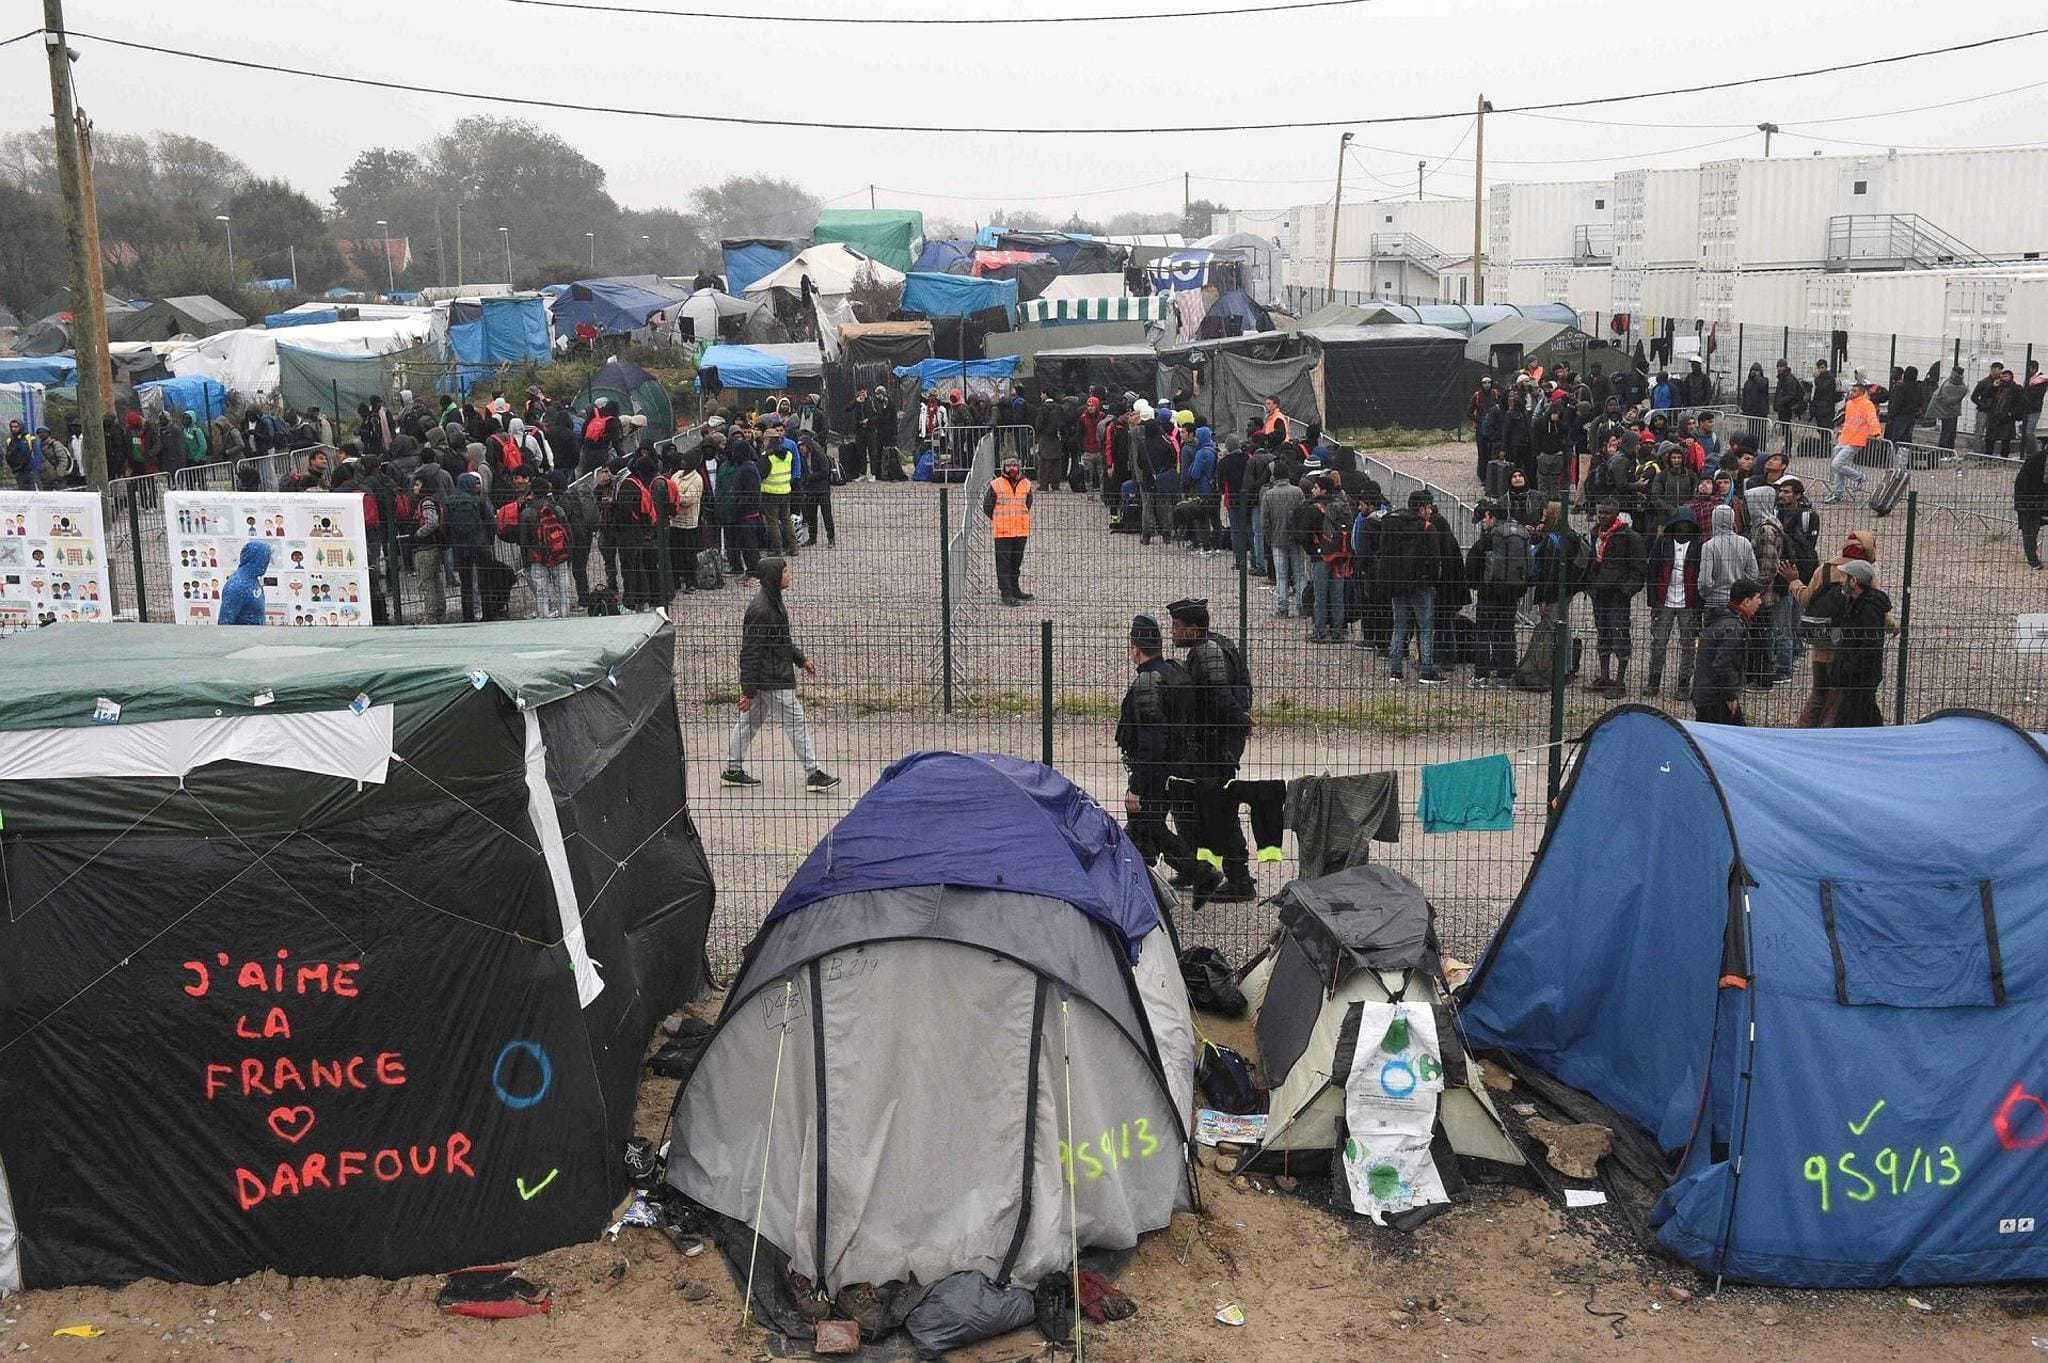 Migrants queue outside a hangar where they were sorted into groups and put on buses headed for shelters across France, as part of the full evacuation of the Calais ,Jungle, camp, in Calais, northern France, on Oct. 24.